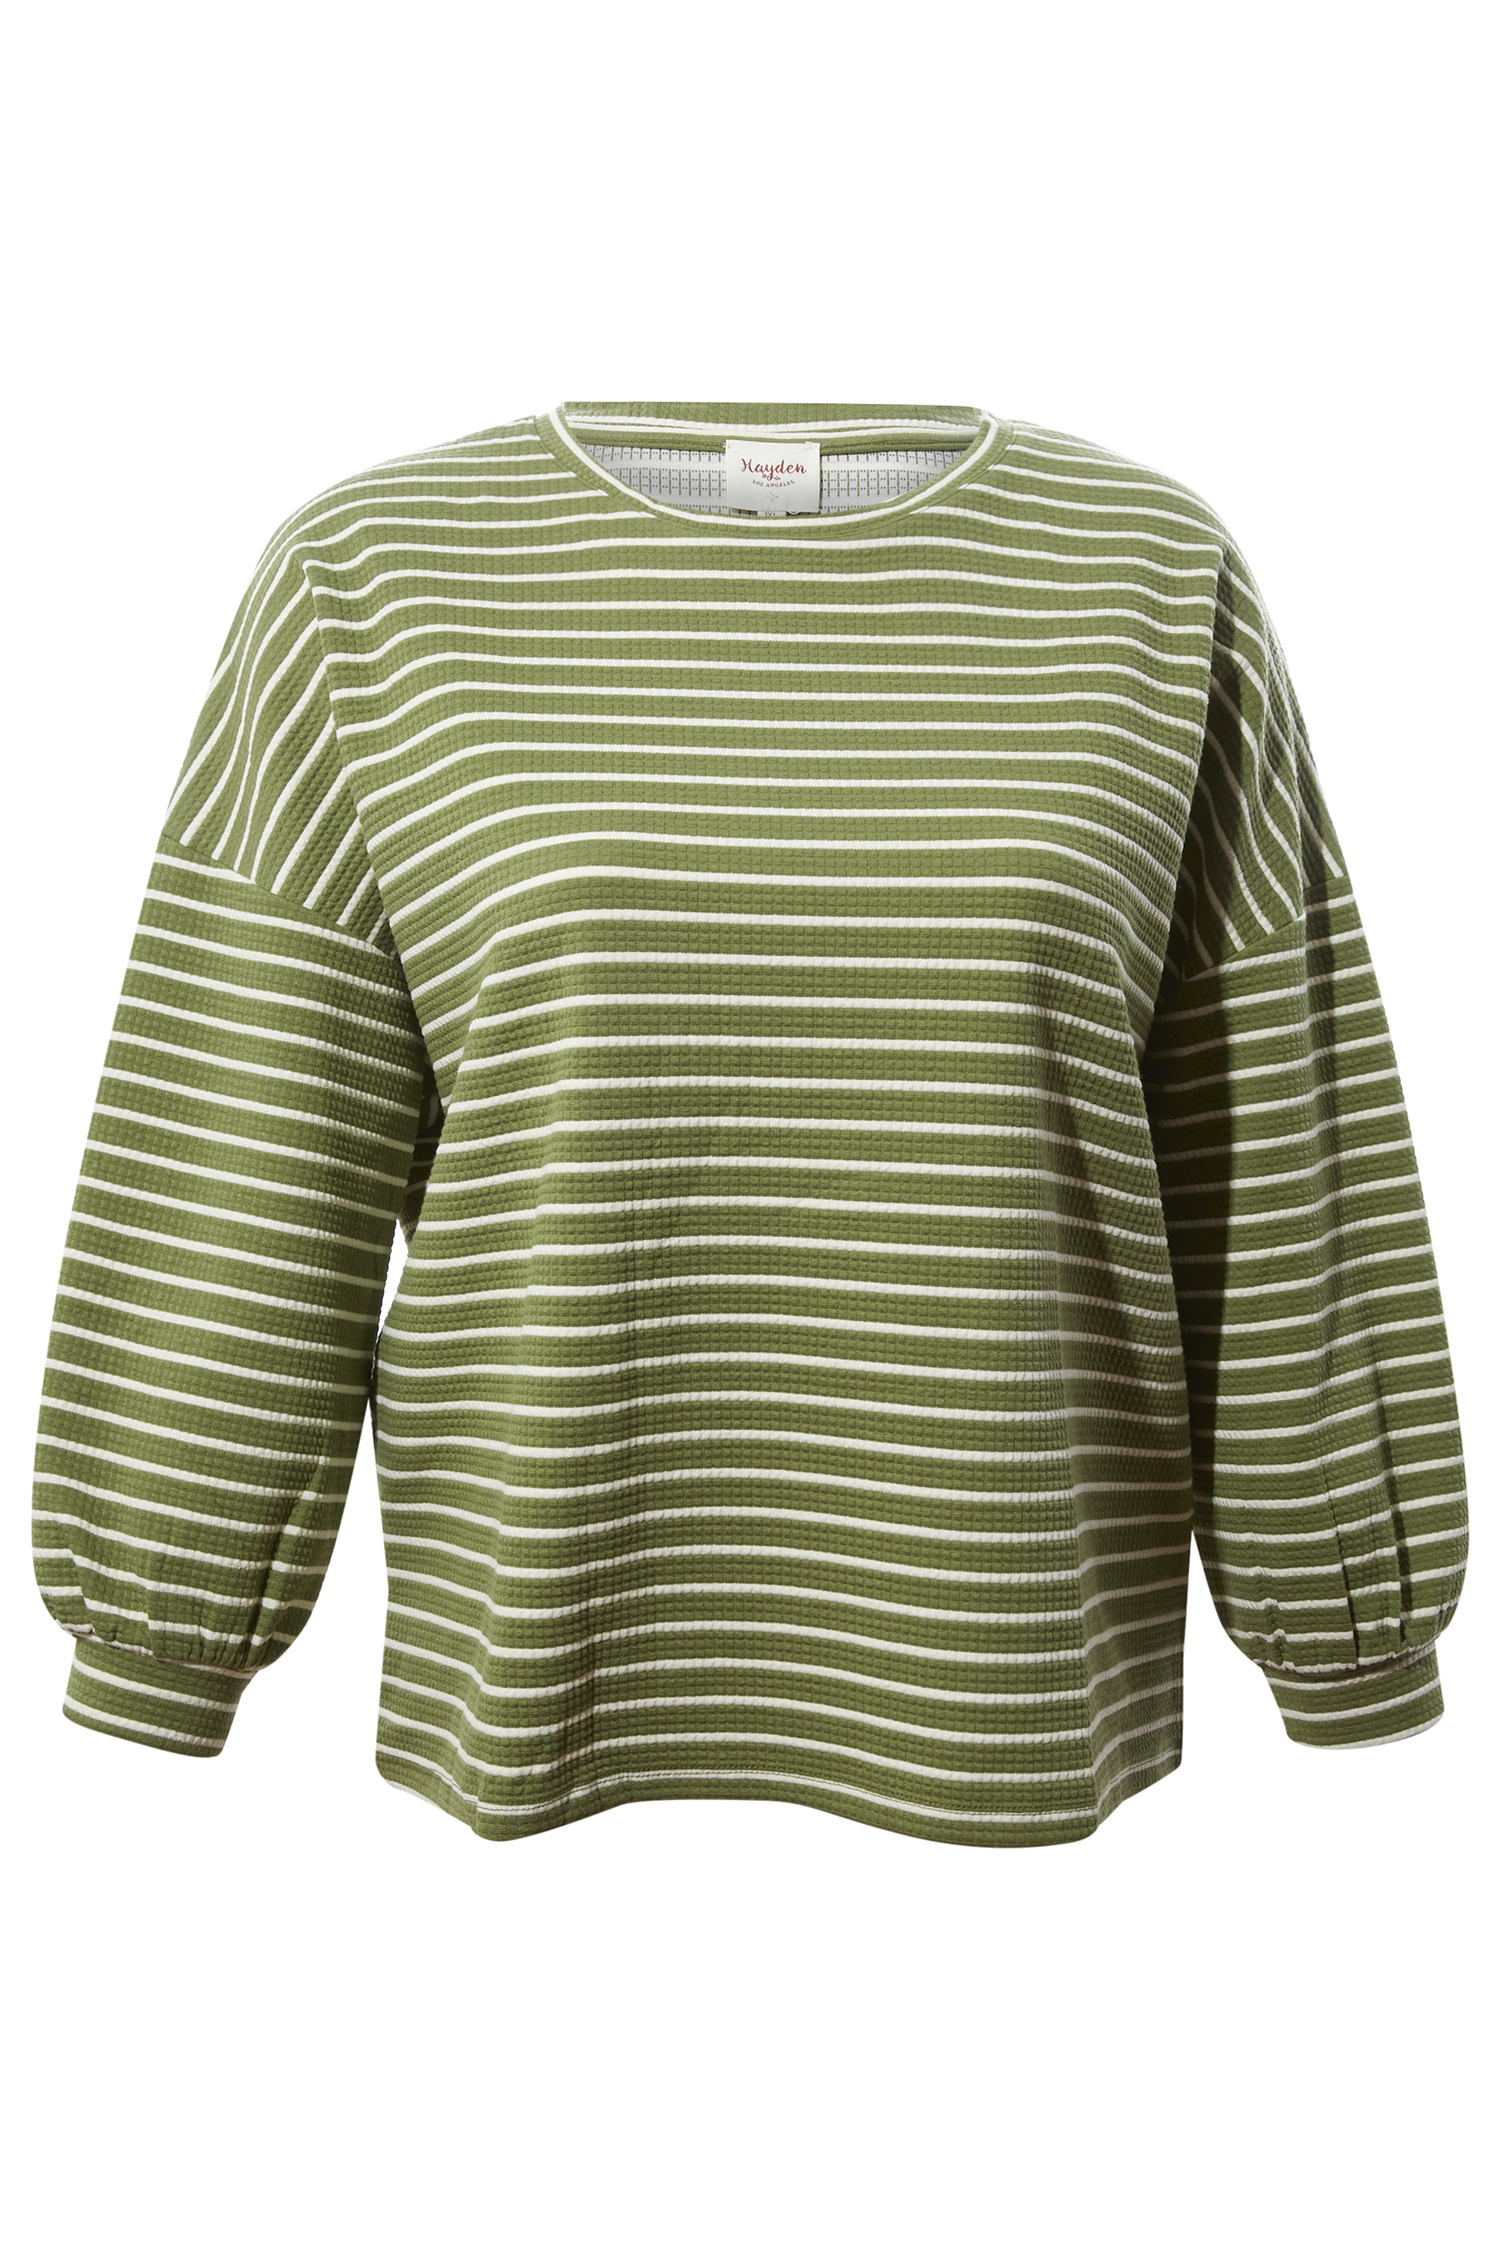 T-Shirt in Sleeve 3X 1X Long | Sage Striped - DAILYLOOK